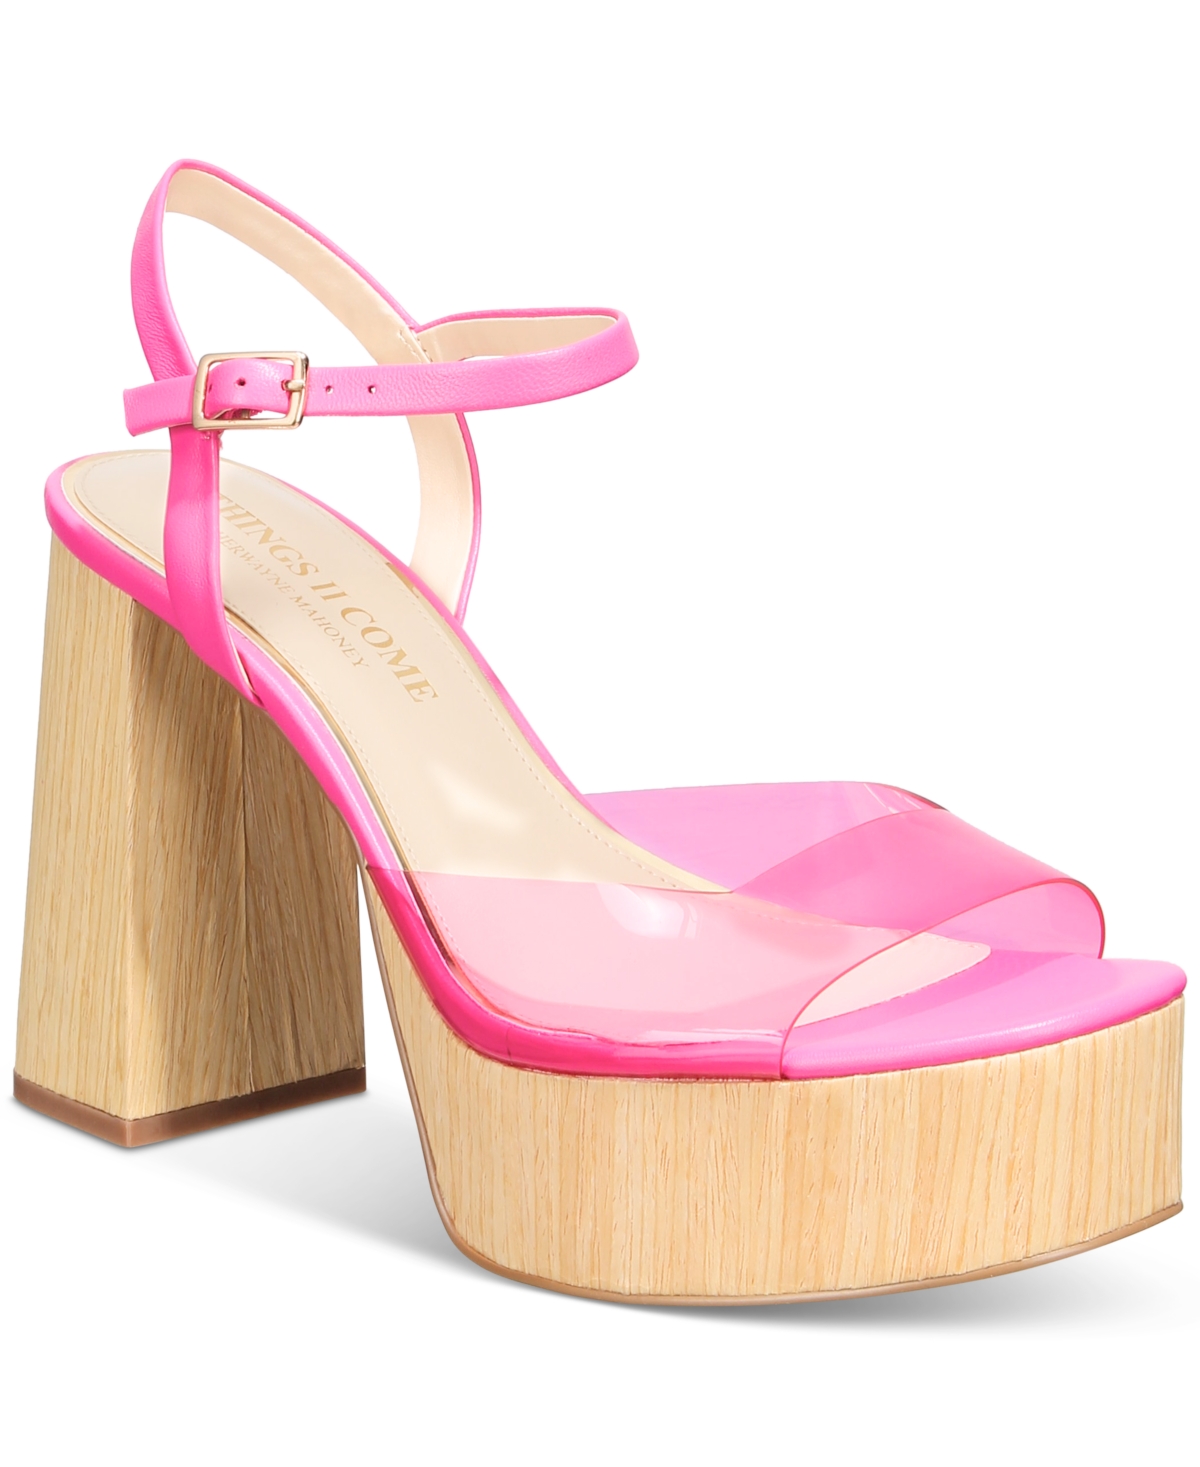 Shop Things Ii Come Women's Daceywood Luxurious Wood Platform Sandals In Shocking Pink